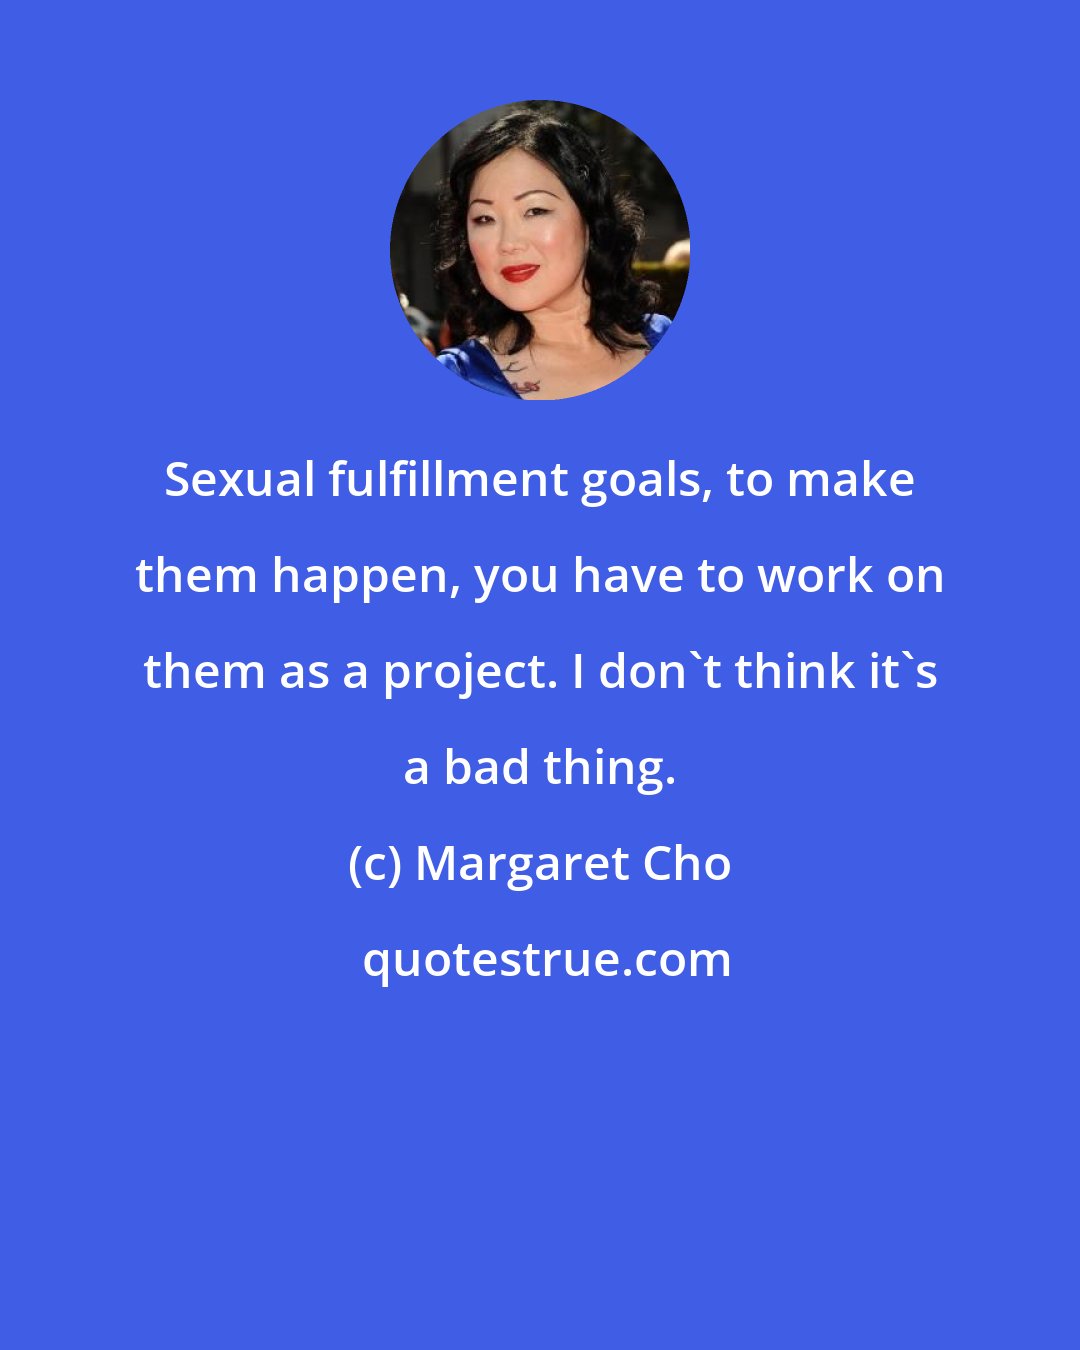 Margaret Cho: Sexual fulfillment goals, to make them happen, you have to work on them as a project. I don't think it's a bad thing.